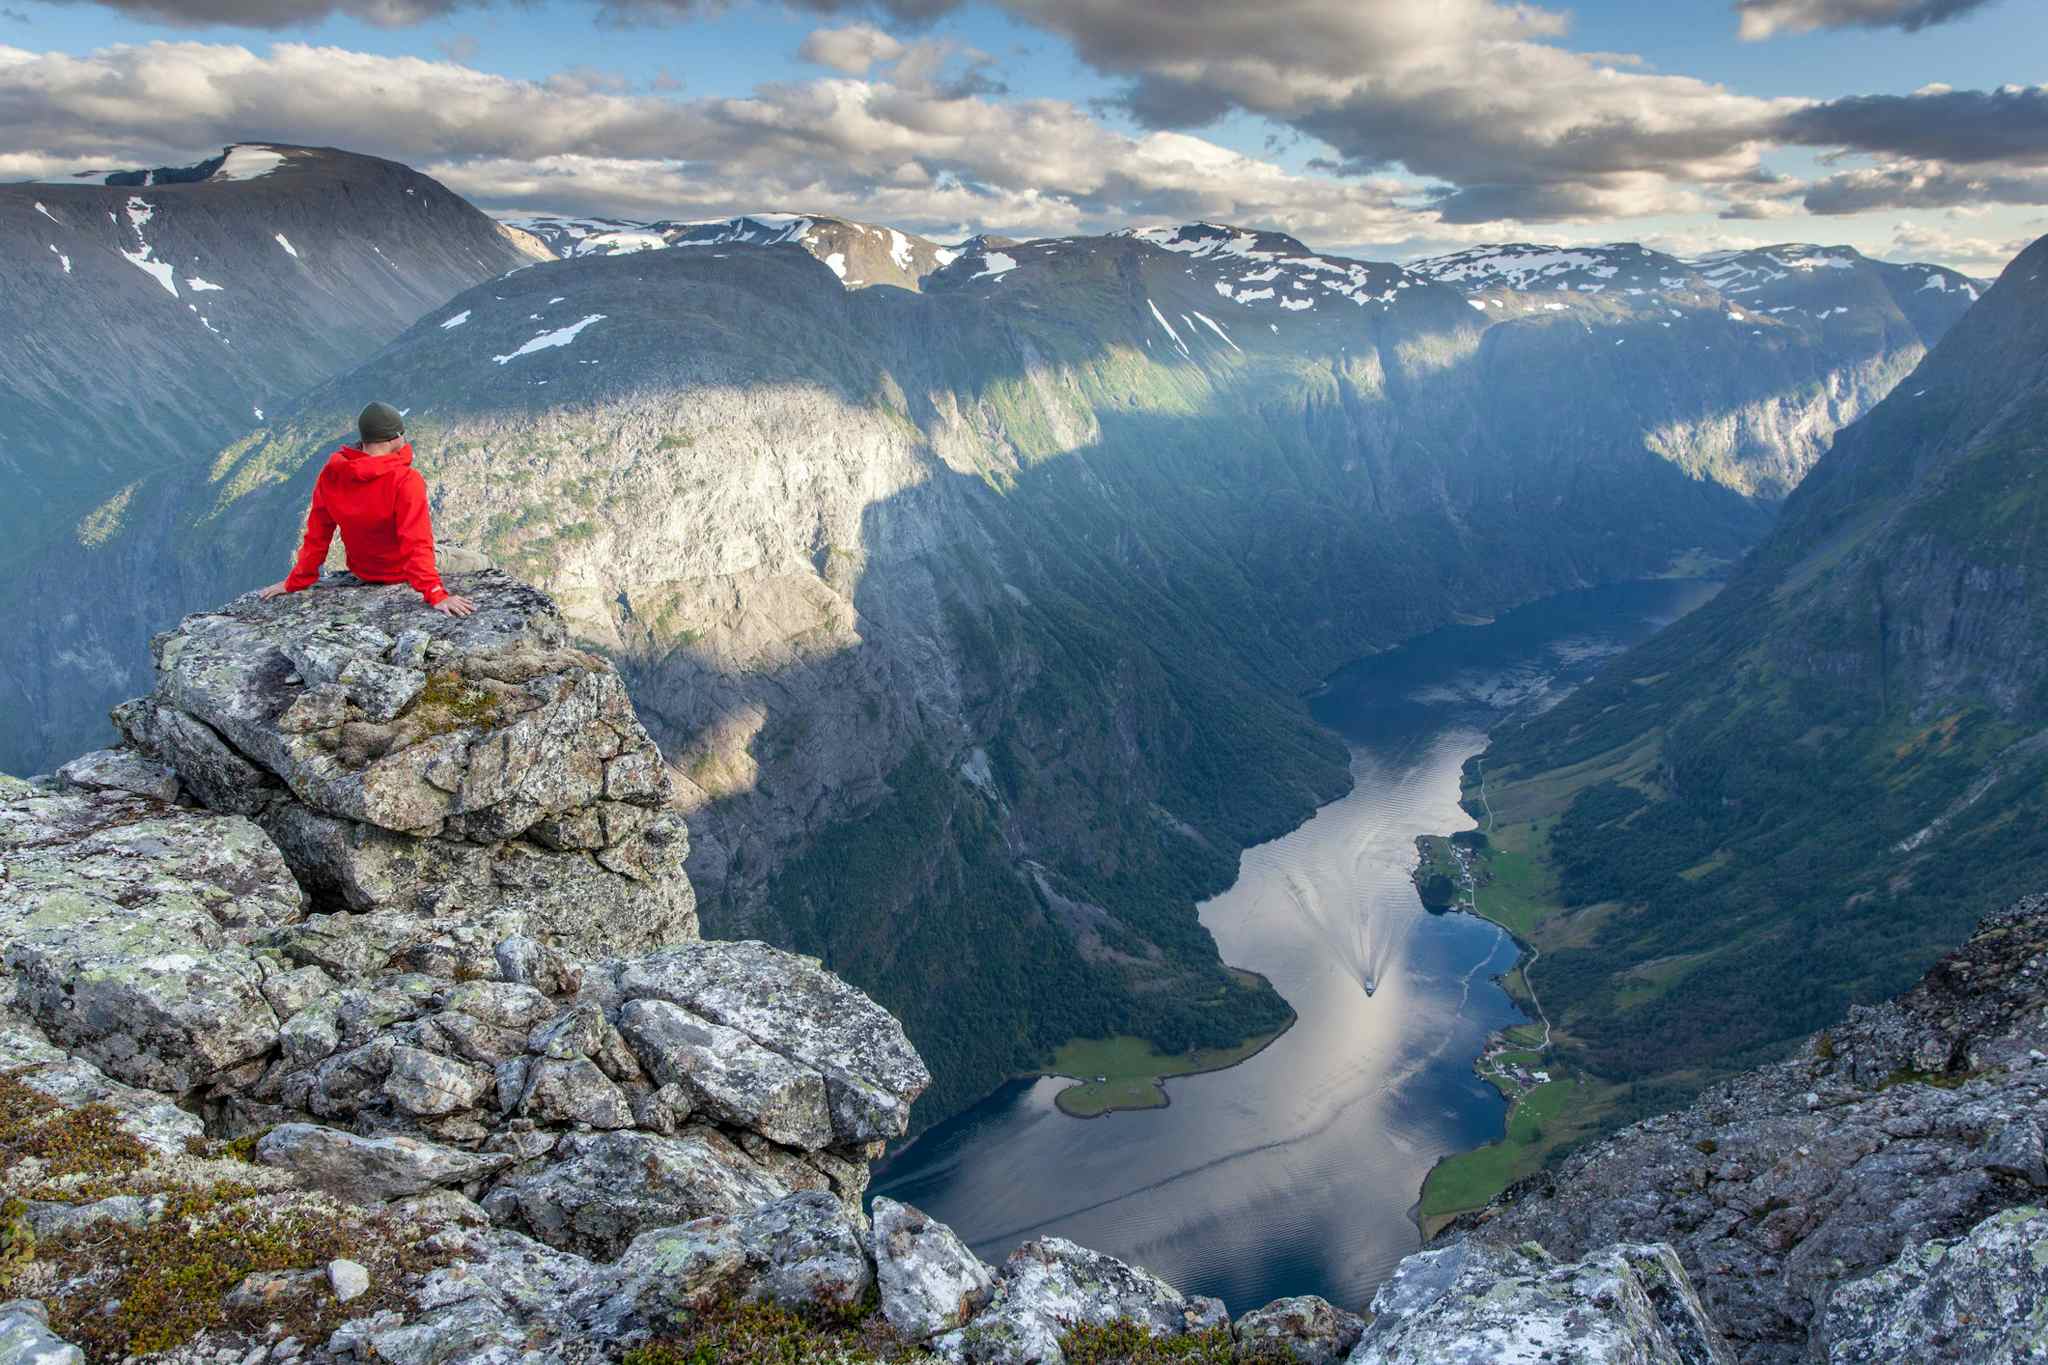 A man sits on a cliff edge in the highlands of above the Naeroyfjord in the Norwegian Fjords.